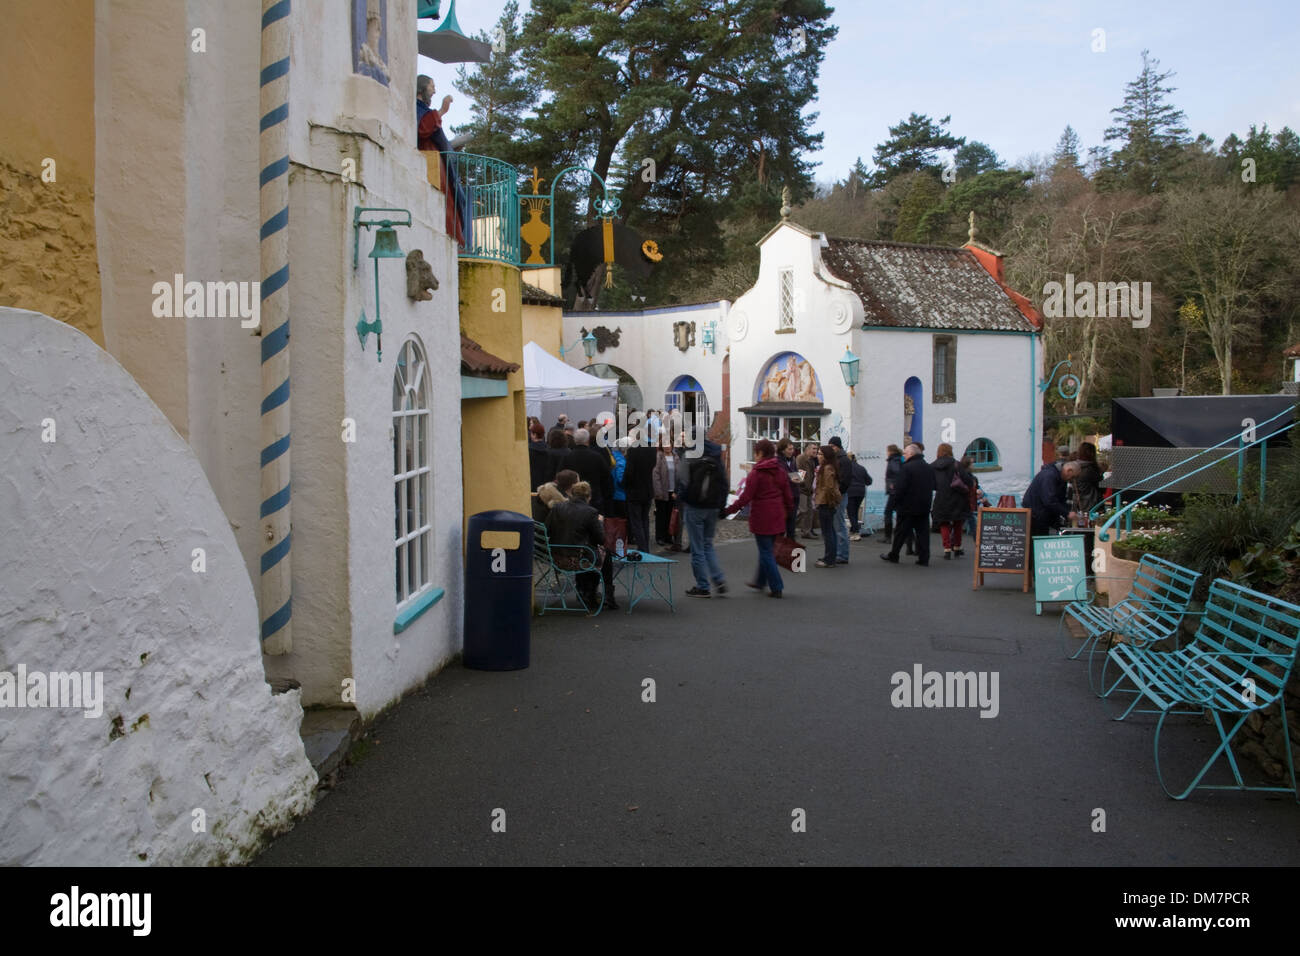 Portmeirion Gwynedd North Wales Visitors to a Food and craft fair in this unique coastal resort built in Italian style Stock Photo